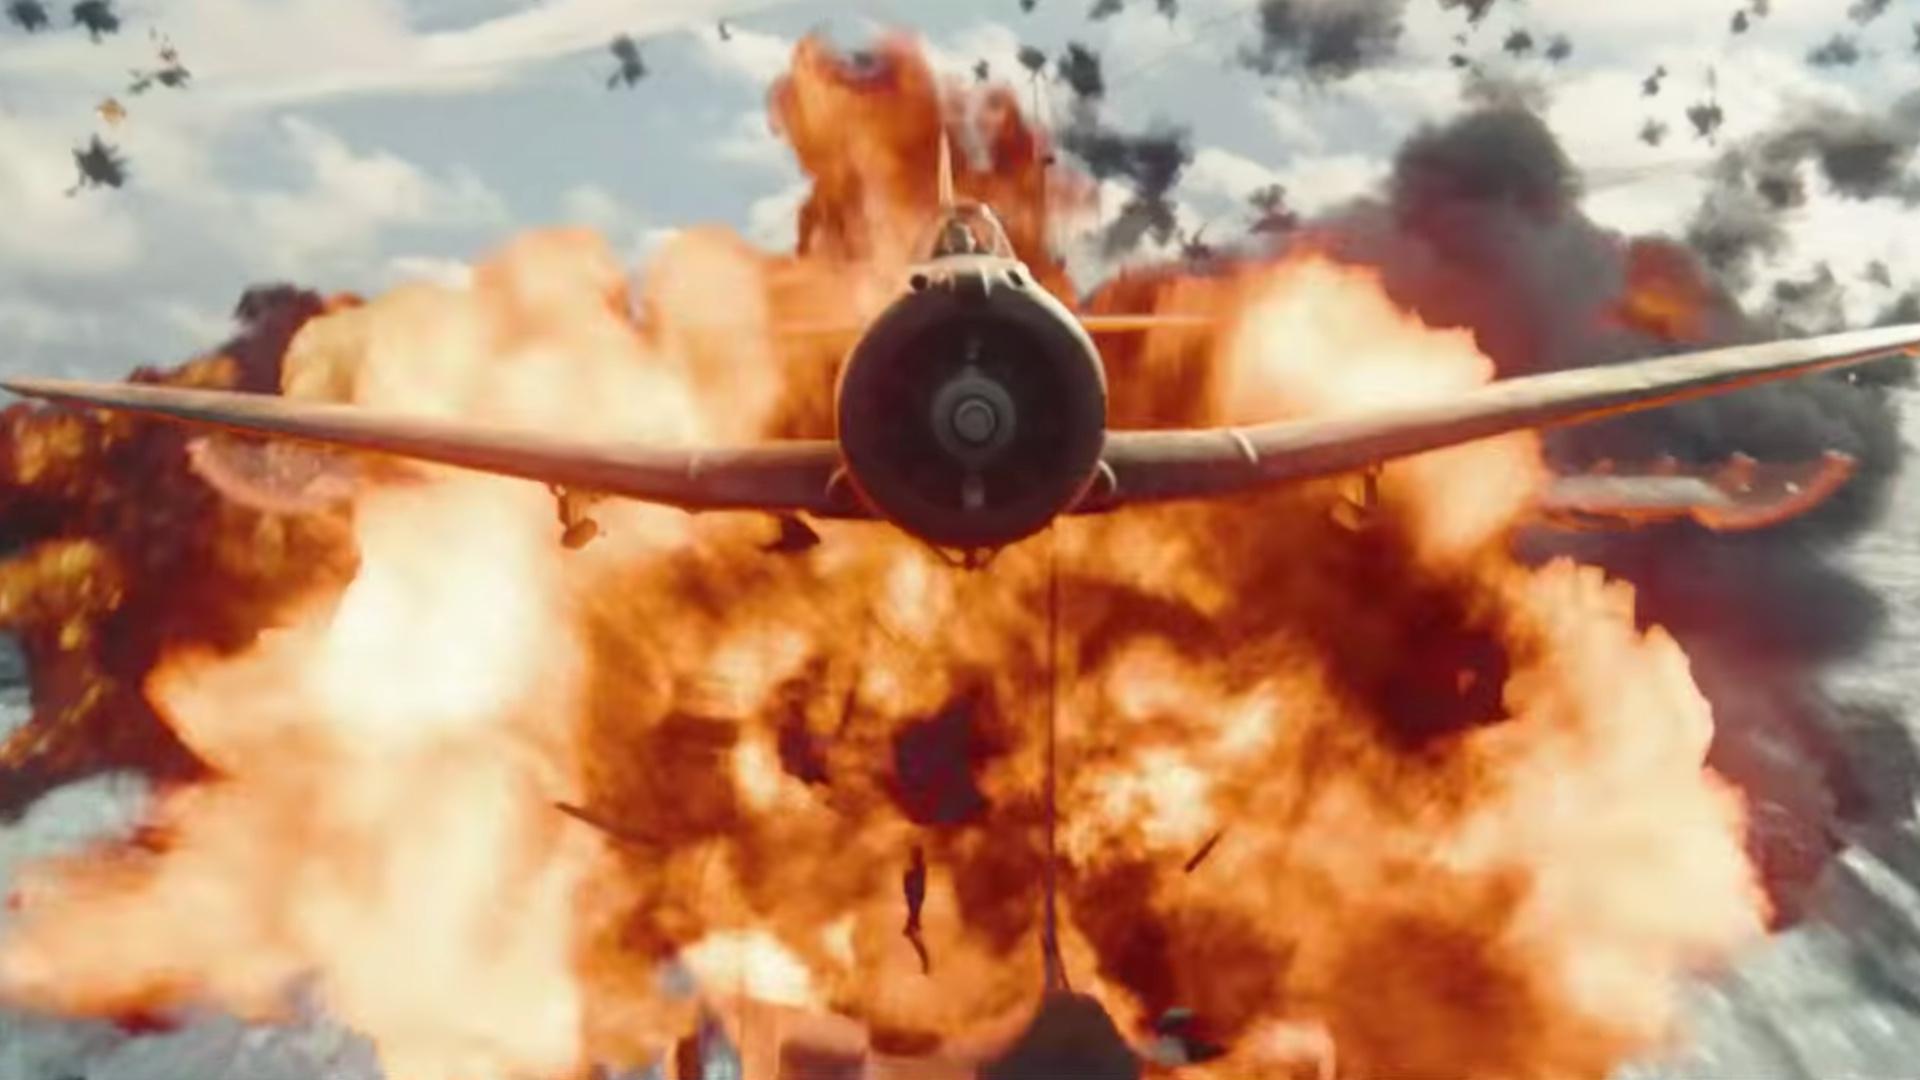 Exciting New for the WWII Action Film MIDWAY From